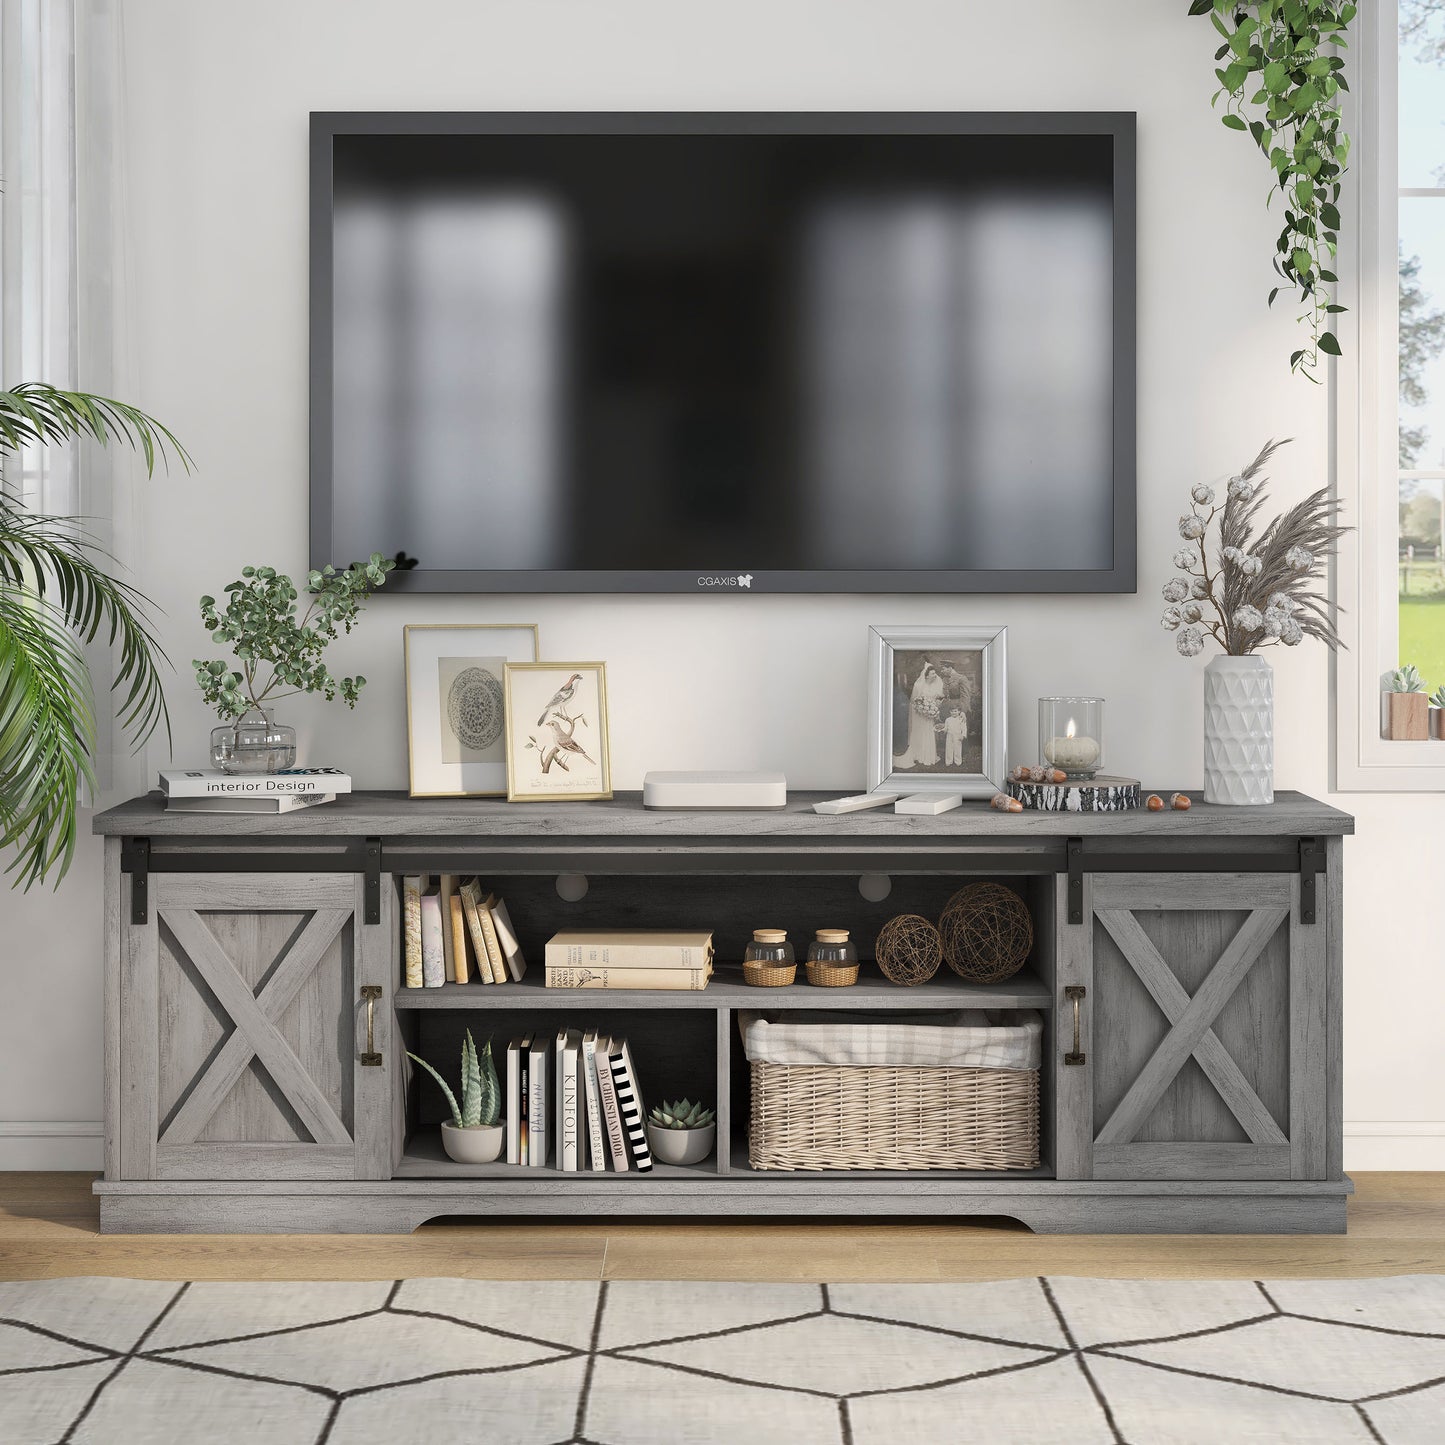 Front facing stand only from a two-piece rustic vintage gray oak TV stand and pier entertainment set in a living room with accessories